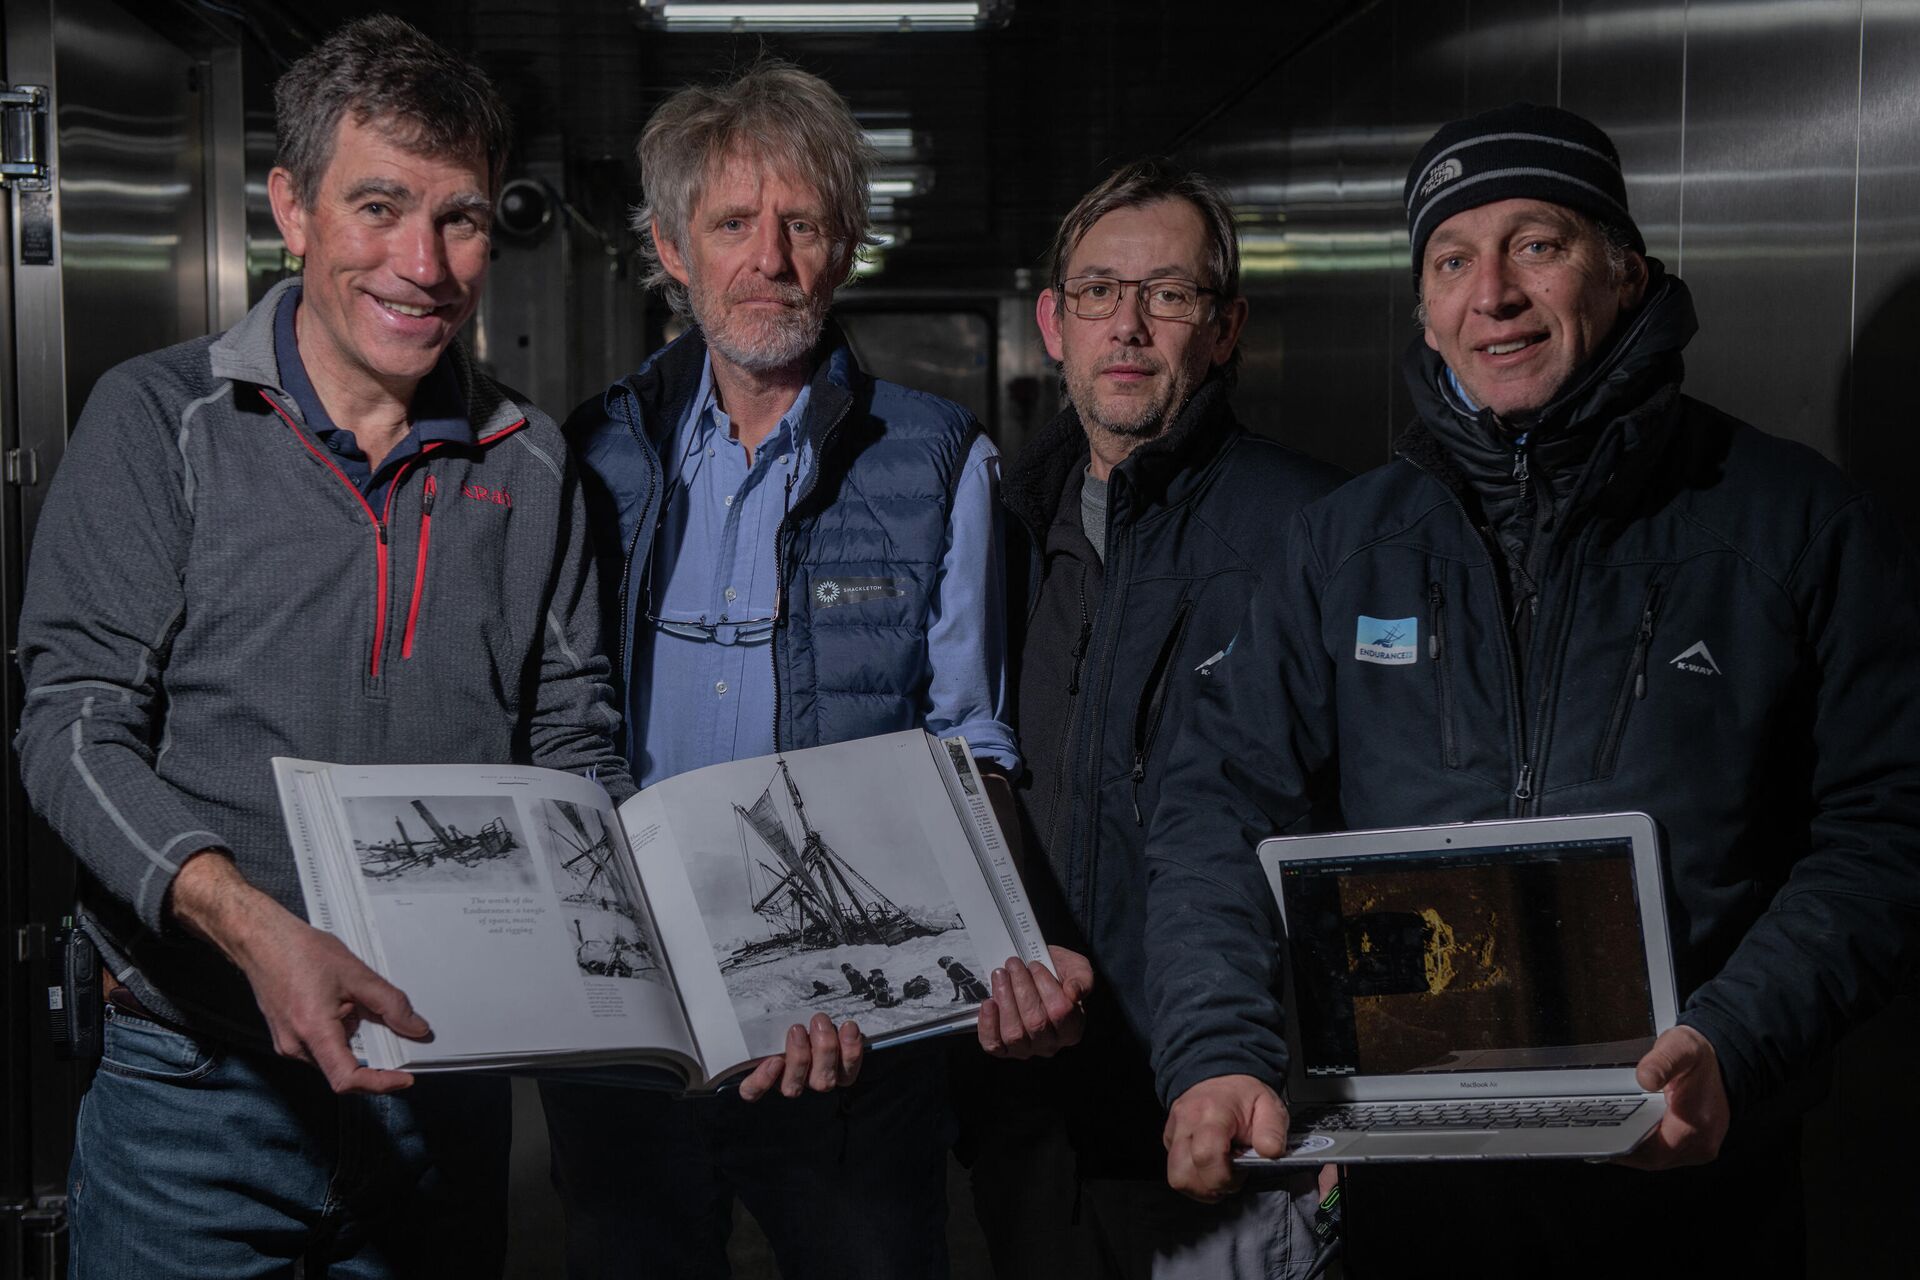 This handout picture taken in Antarctica's Weddell sea on March 5, 2022, and released by the Falklands Maritime Heritage Trust shows (From L) John Shears, Endurance22 Expedition Leader, Mensun Bound, Director of Exploration, Nico Vincent, Expedition Sub-Sea Manager, JC Caillens, Off-Shore Manager with the first scan of the wreck and photos of Frank Hurley. - One of the world's most storied shipwrecks, Ernest Shackleton's Endurance, has been discovered off the coast of Antarctica more than a century after its sinking, explorers announced on March 9. Endurance was discovered at a depth of 3,008 metres (9,869 feet) in the Weddell Sea, about four miles from where it was slowly crushed by pack ice in 1915 - Sputnik International, 1920, 09.03.2022